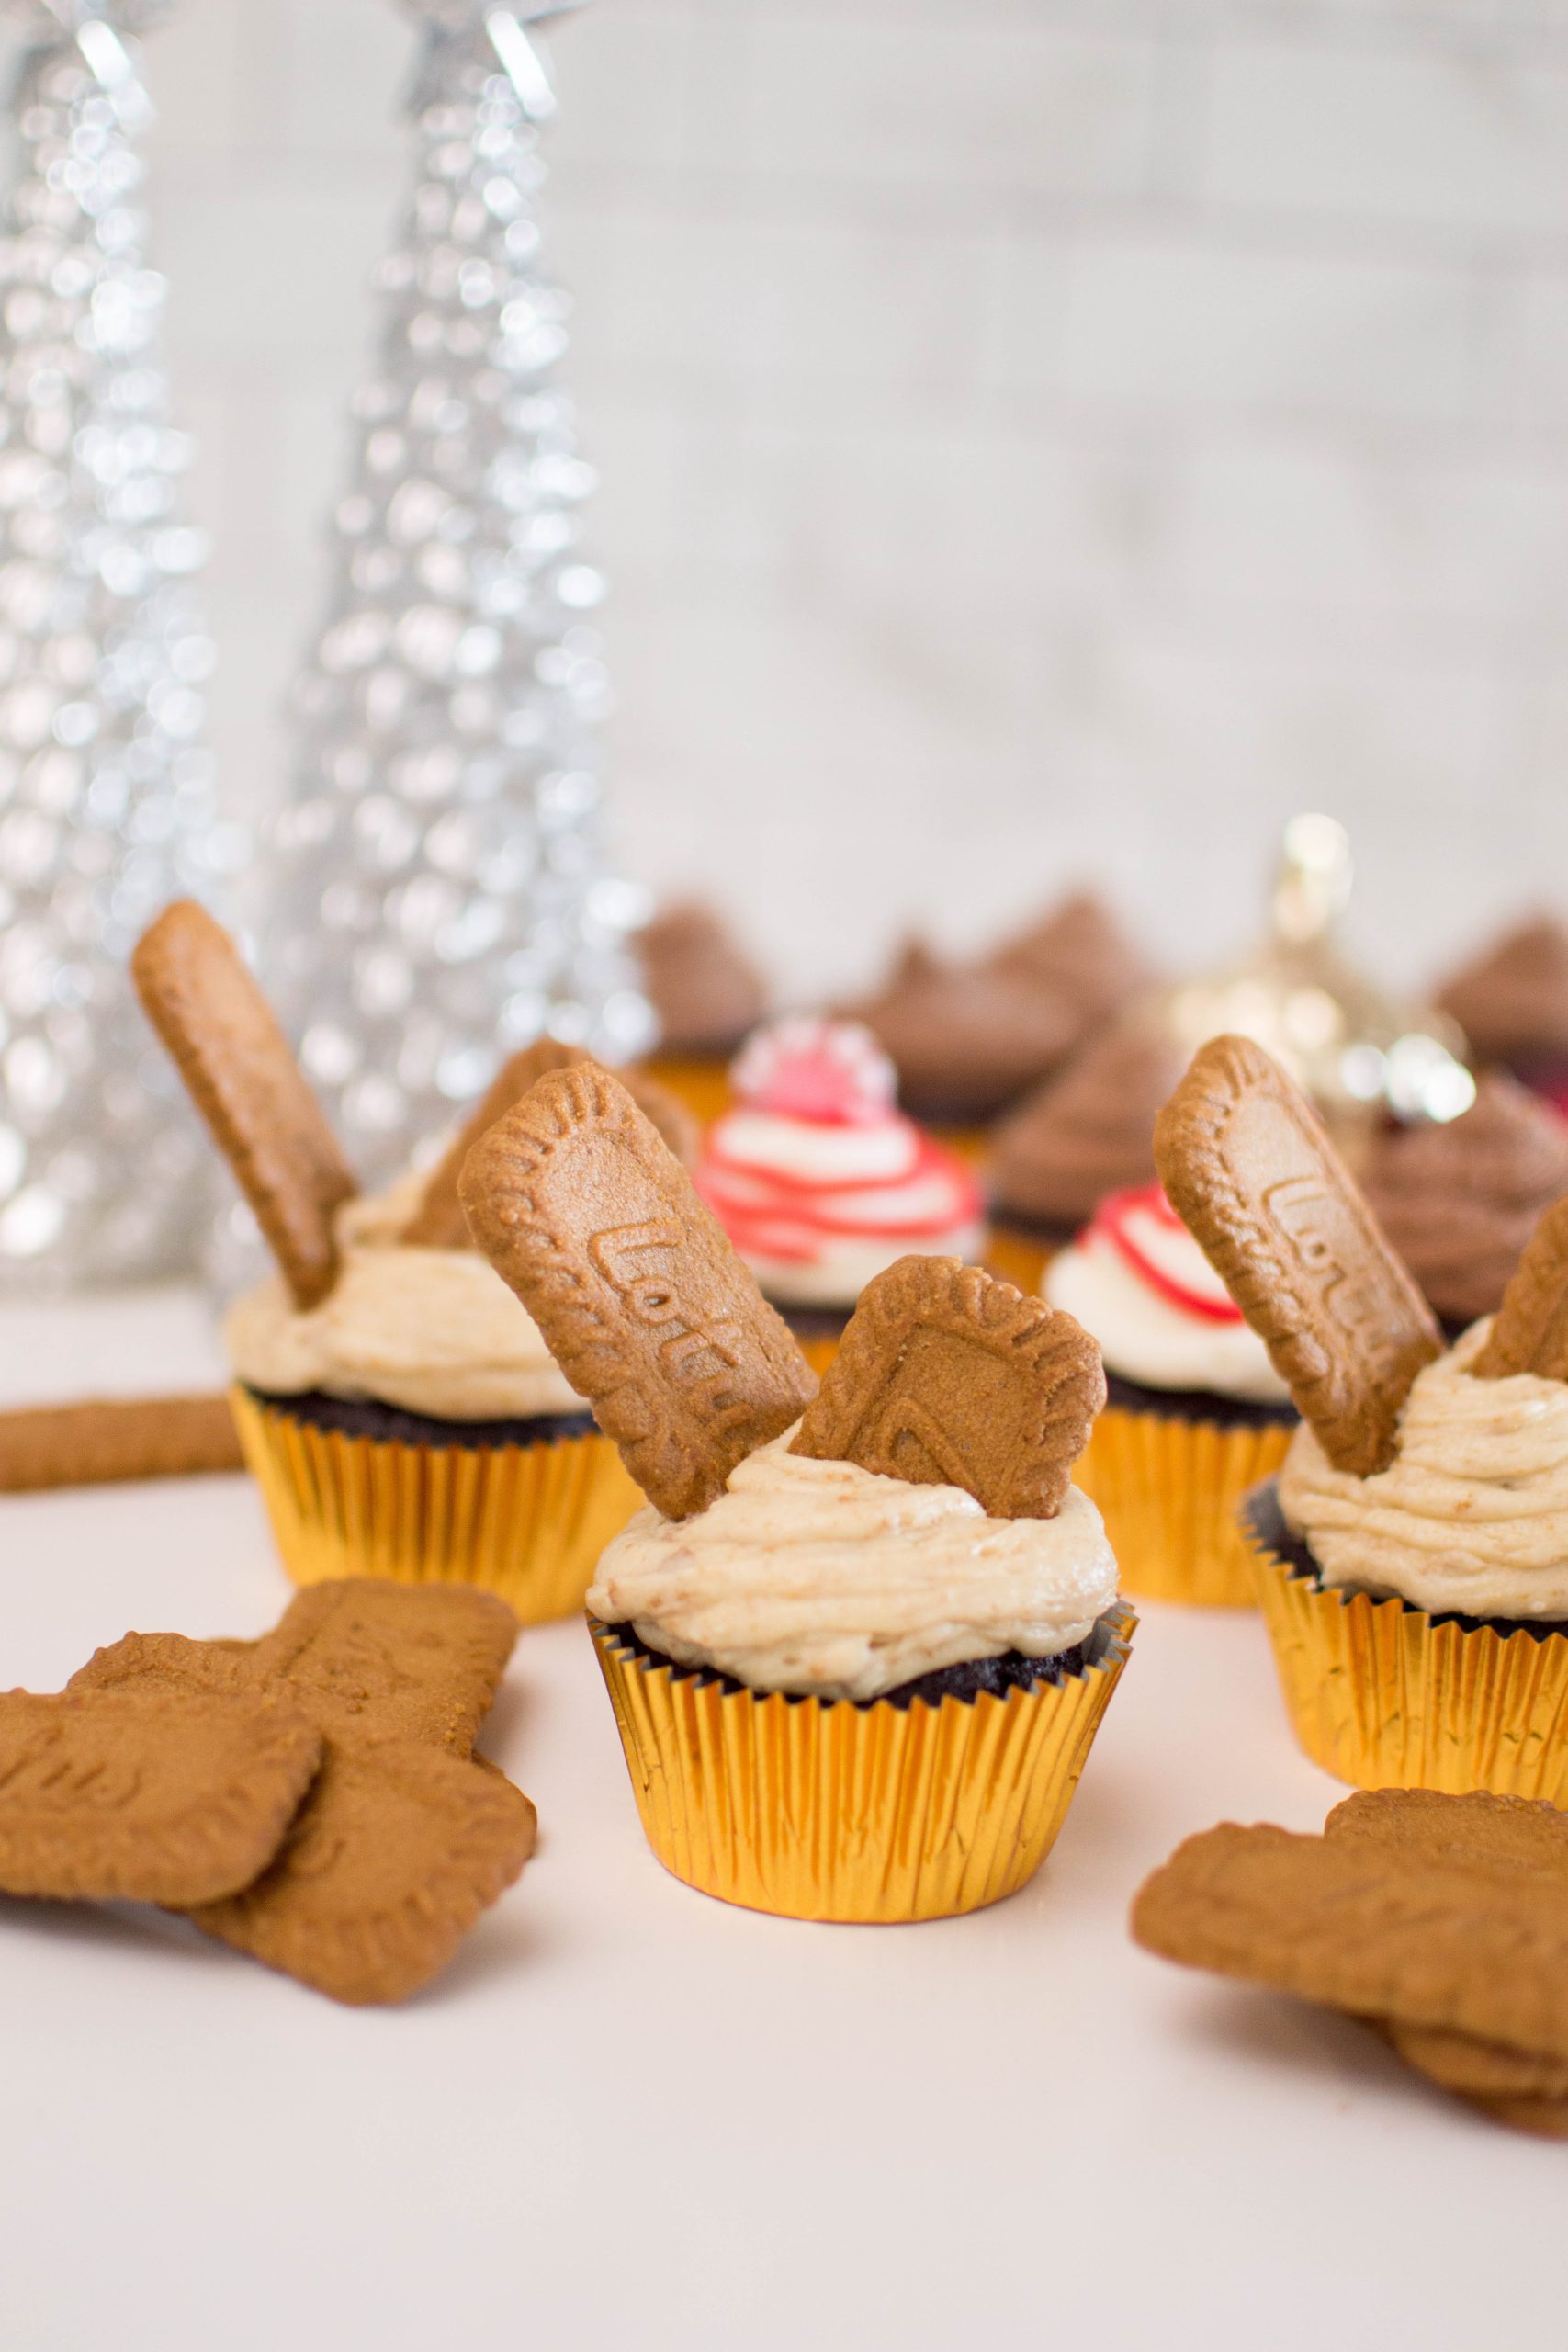 Our Biscoff Cupcakes are made up of a chocolate cupcake base, and topped with Biscoff buttercream – a frosting that’s luscious, smooth, and jam-packed full of flavor!